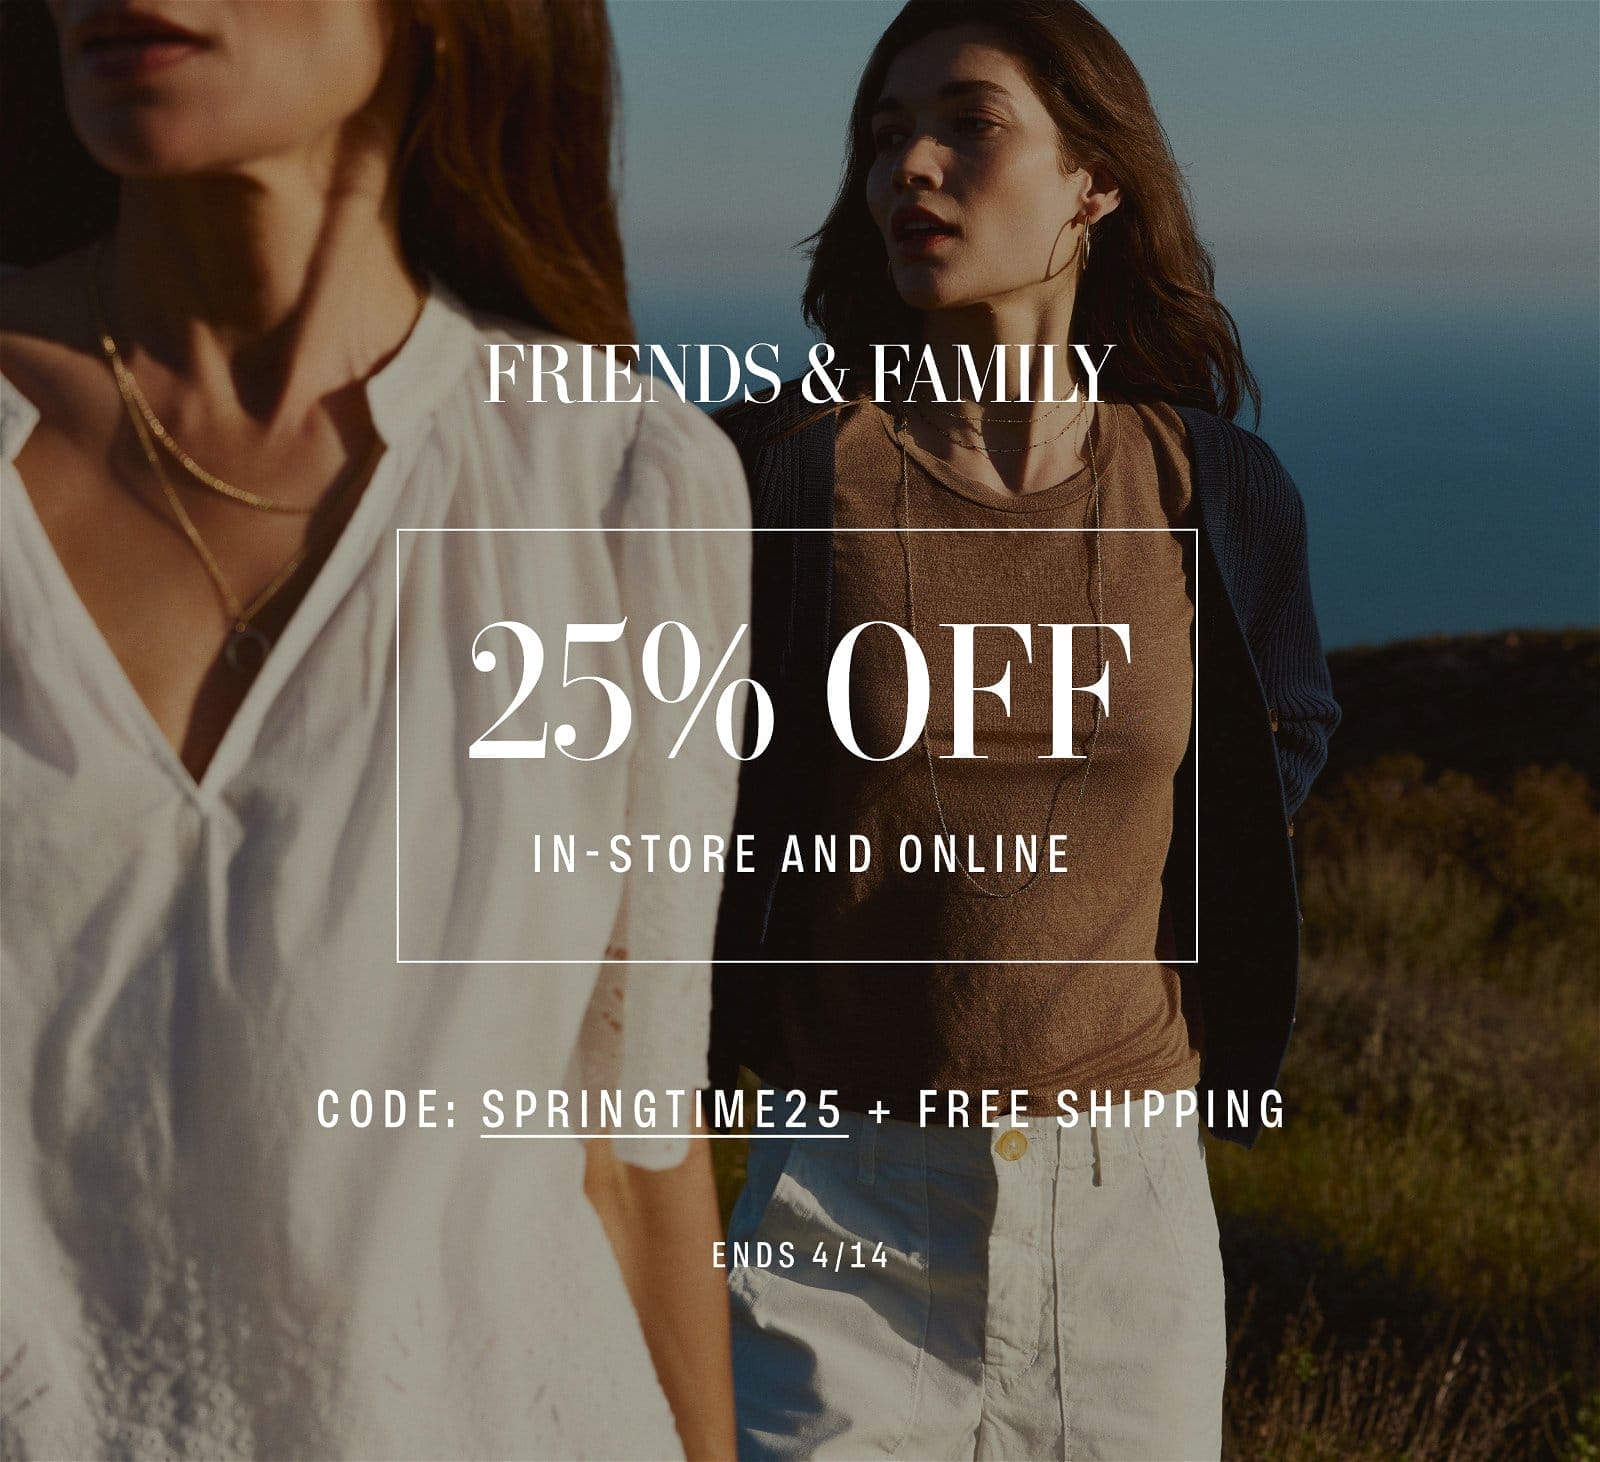 FRIENDS & FAMILY! 25% OFF IN-STORE AND ONLINE. CODE: SPRINGTIME25 + FREE SHIPPING. ENDS 4/14